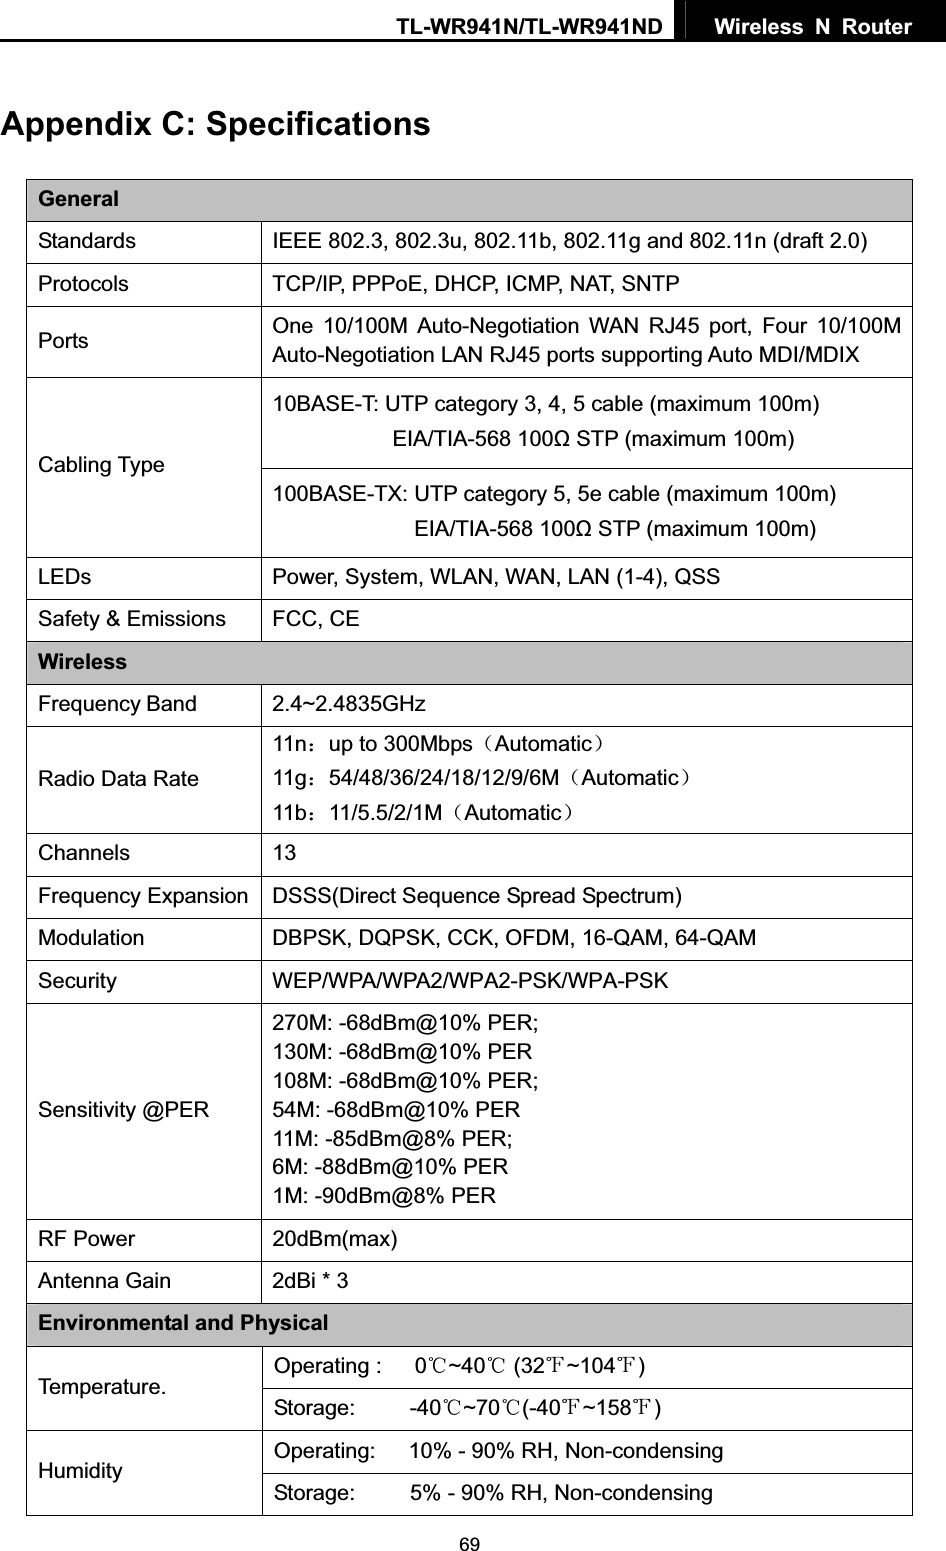 TL-WR941N/TL-WR941ND  Wireless N Router  69Appendix C: Specifications GeneralStandards  IEEE 802.3, 802.3u, 802.11b, 802.11g and 802.11n (draft 2.0) Protocols  TCP/IP, PPPoE, DHCP, ICMP, NAT, SNTP Ports  One 10/100M Auto-Negotiation WAN RJ45 port, Four 10/100M Auto-Negotiation LAN RJ45 ports supporting Auto MDI/MDIX 10BASE-T: UTP category 3, 4, 5 cable (maximum 100m) EIA/TIA-568 100ȍ STP (maximum 100m) Cabling Type 100BASE-TX: UTP category 5, 5e cable (maximum 100m) EIA/TIA-568 100ȍ STP (maximum 100m) LEDs Power, System, WLAN, WAN, LAN (1-4), QSS Safety &amp; Emissions  FCC, CE Wireless Frequency Band 2.4~2.4835GHz Radio Data Rate 11n˖up to 300Mbps˄Automatic˅11g˖54/48/36/24/18/12/9/6M˄Automatic˅11b˖11/5.5/2/1M˄Automatic˅Channels 13 Frequency Expansion  DSSS(Direct Sequence Spread Spectrum) Modulation DBPSK, DQPSK, CCK, OFDM, 16-QAM, 64-QAM Security WEP/WPA/WPA2/WPA2-PSK/WPA-PSK Sensitivity @PER 270M: -68dBm@10% PER; 130M: -68dBm@10% PER 108M: -68dBm@10% PER;   54M: -68dBm@10% PER 11M: -85dBm@8% PER;   6M: -88dBm@10% PER 1M: -90dBm@8% PER RF Power  20dBm(max) Antenna Gain  2dBi * 3   Environmental and Physical Operating :   0ć~40ć (32 ~104̧̧)Temperature.  Storage:     -40ć~70ć(-40̧~158̧)Operating:      10% - 90% RH, Non-condensing Humidity Storage:          5% - 90% RH, Non-condensing 